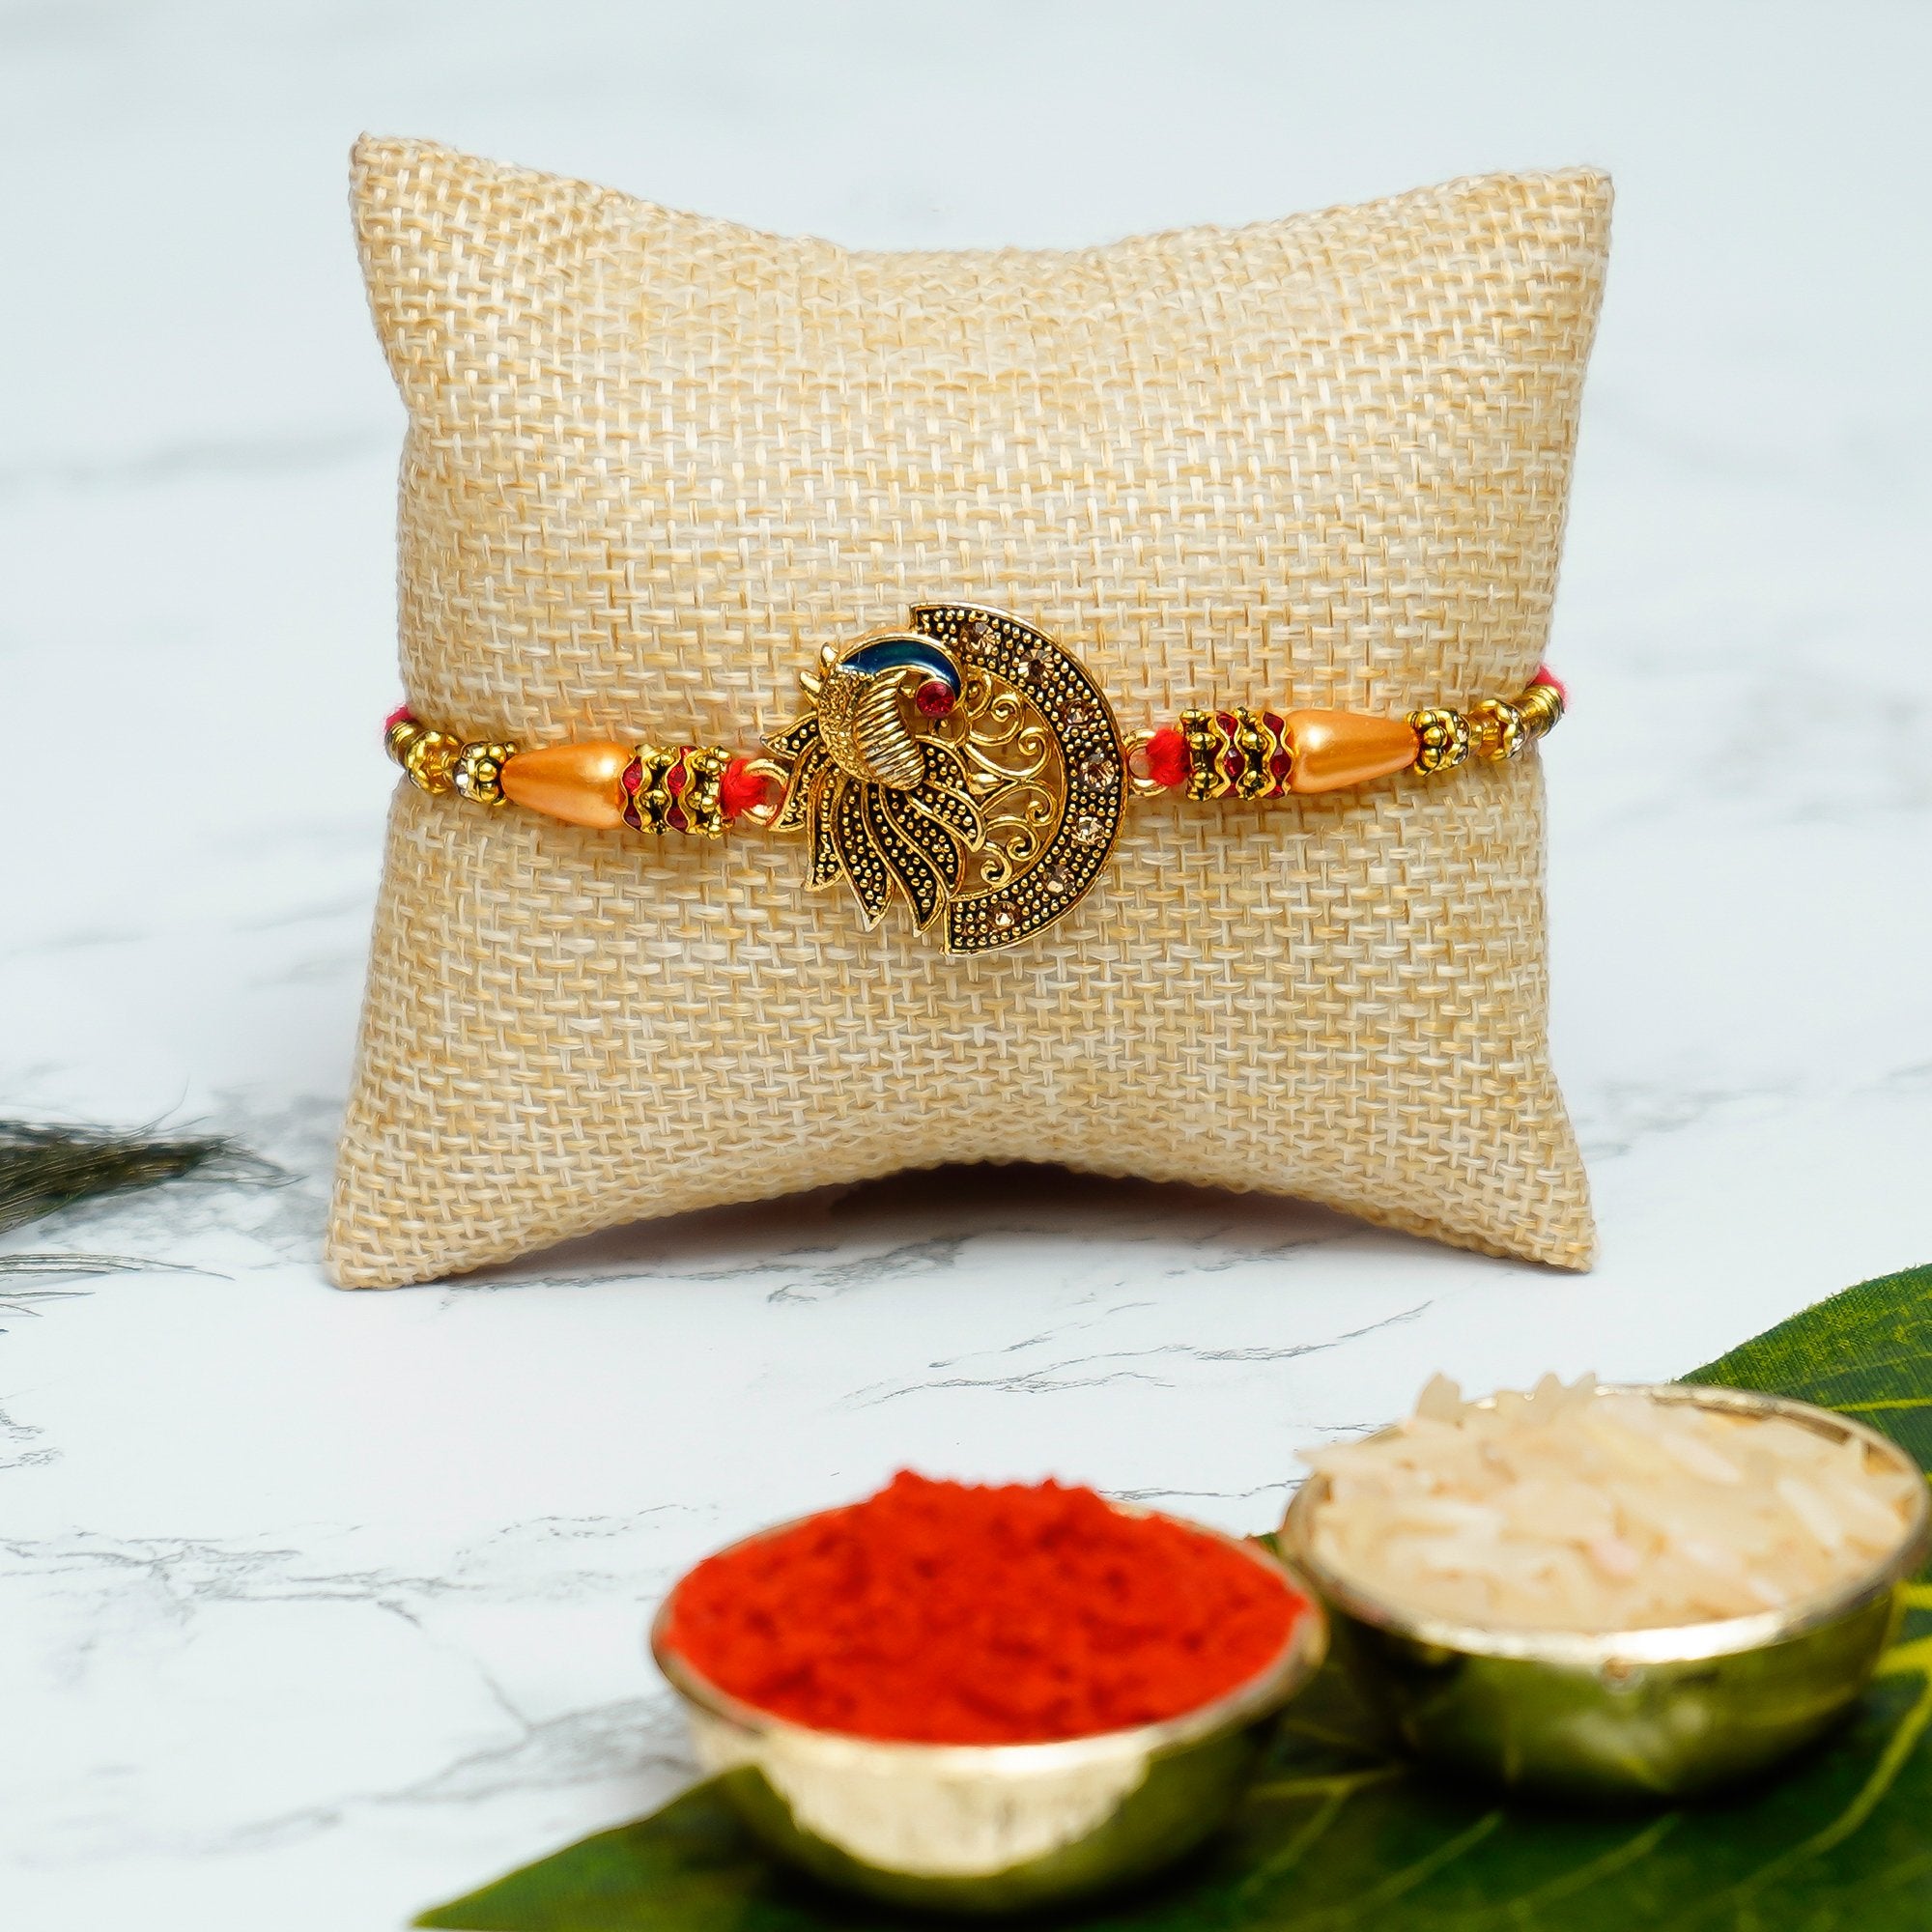 Designer Peacock Rakhi with Golden Handcrafted Palm Buddha Decorative Showpiece with Wooden Base, Fragranced Petals and Tealight and Roli Chawal Pack, Best Wishes Greeting Card 1